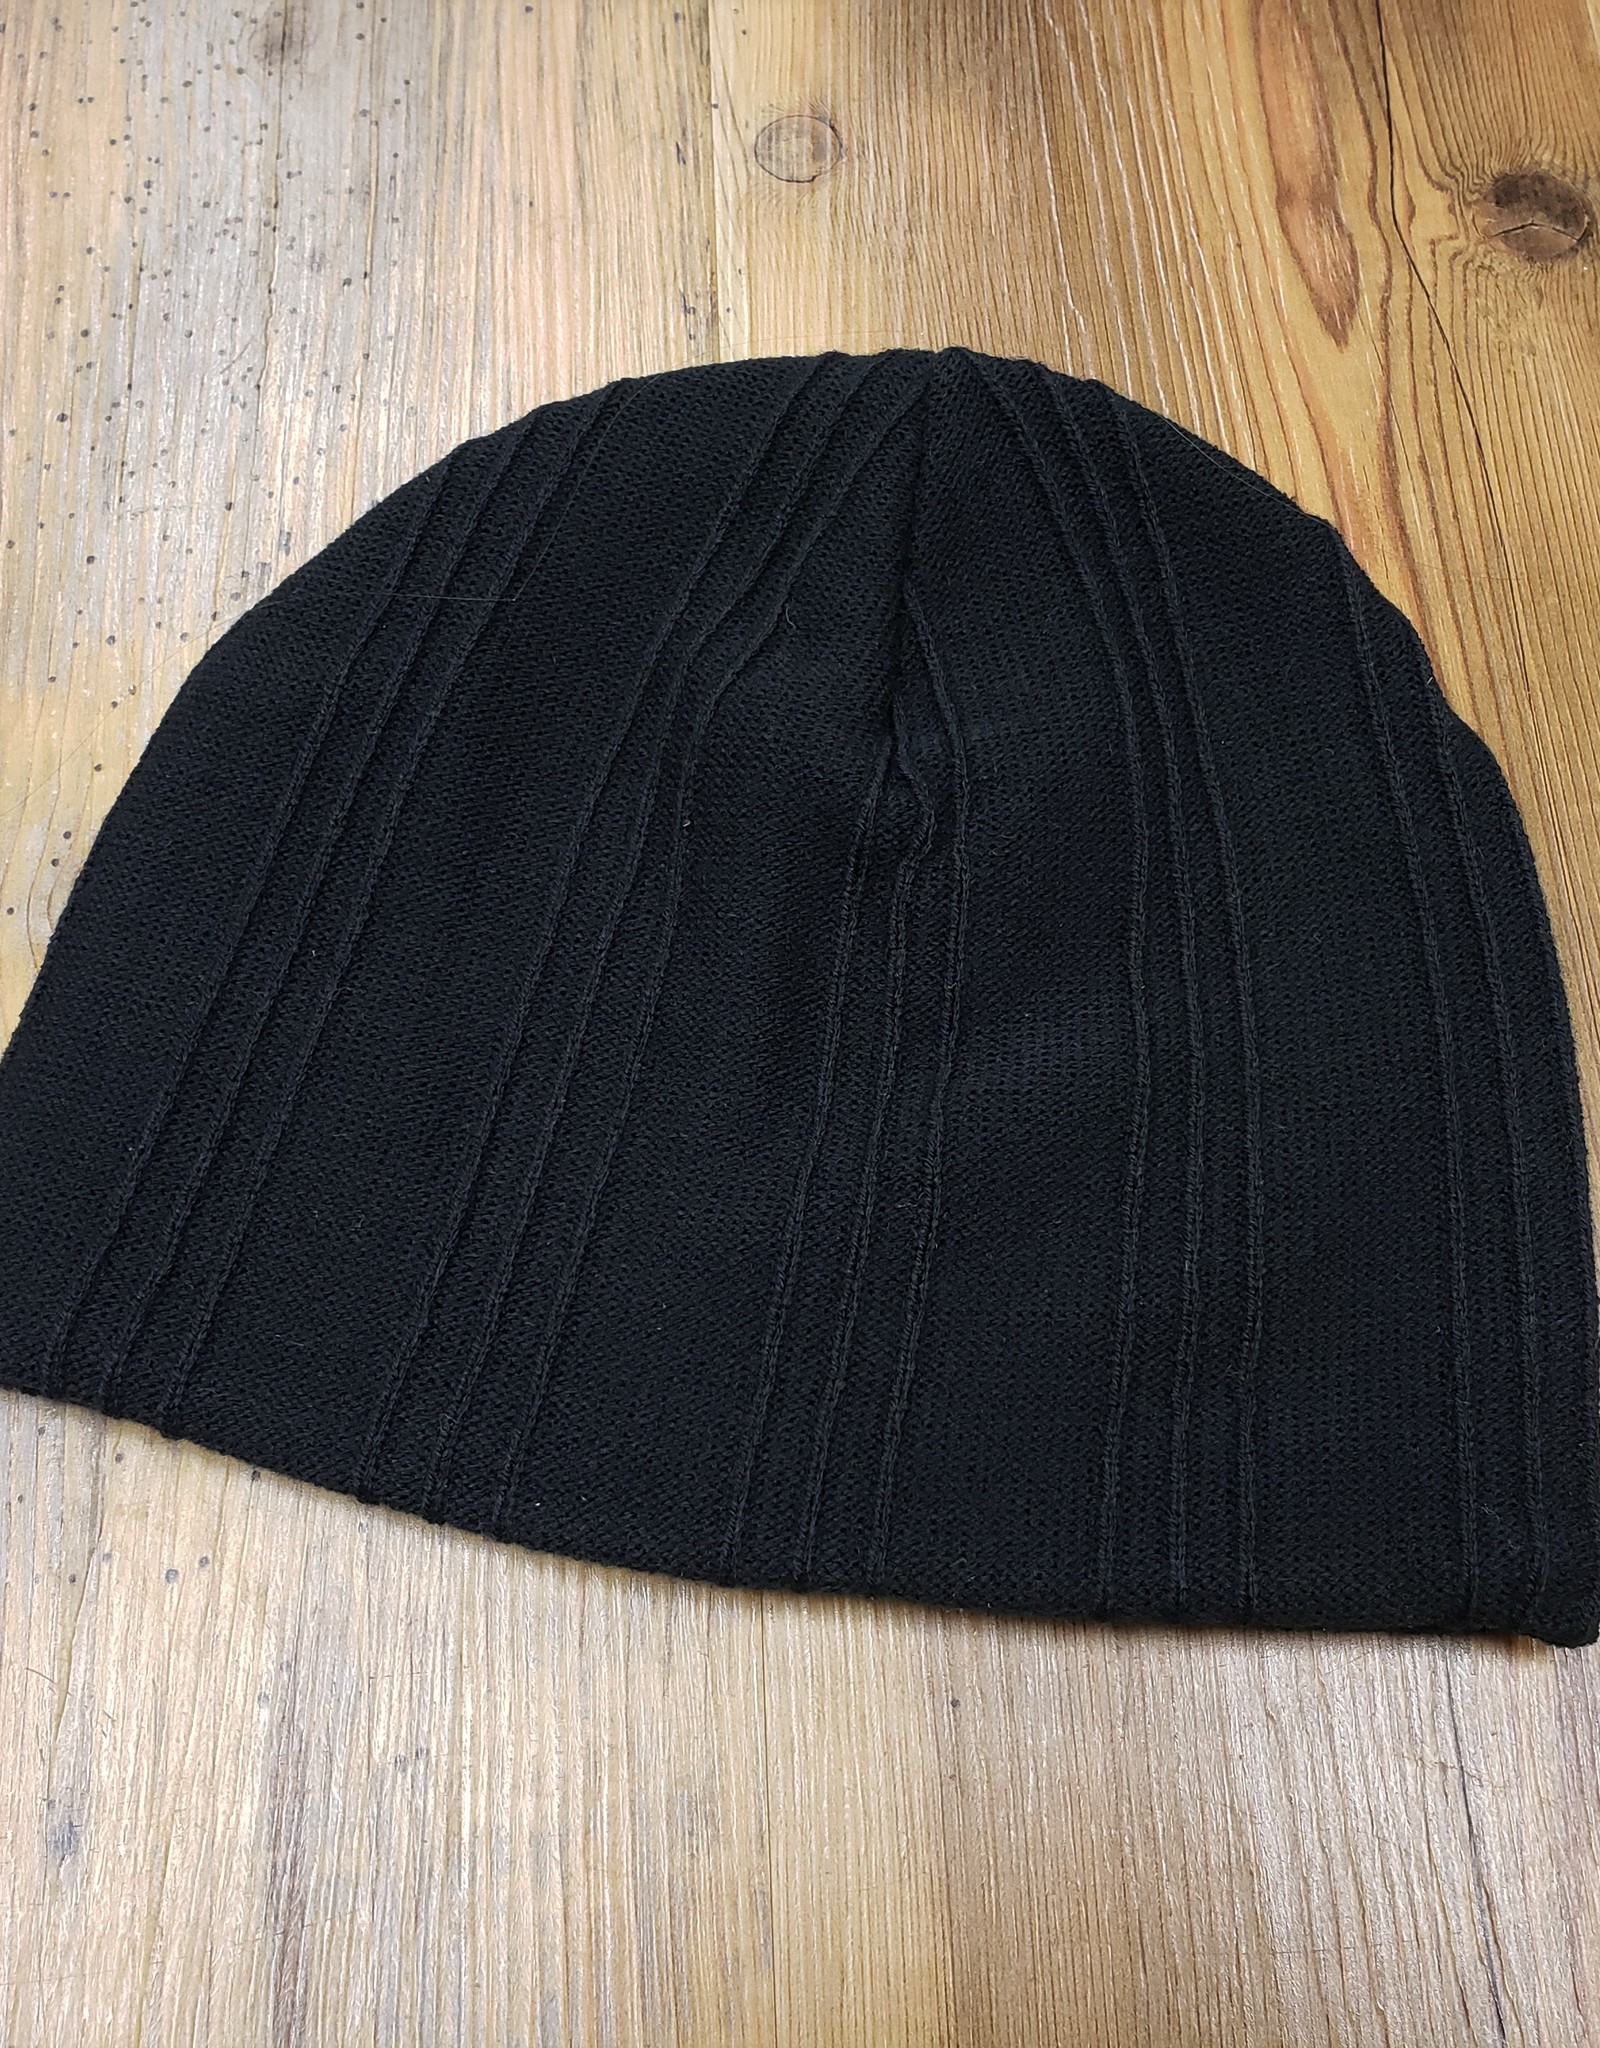 WORLD FAMOUS SALES BLACK  TOQUE FLEECE LINED  CAN MADE